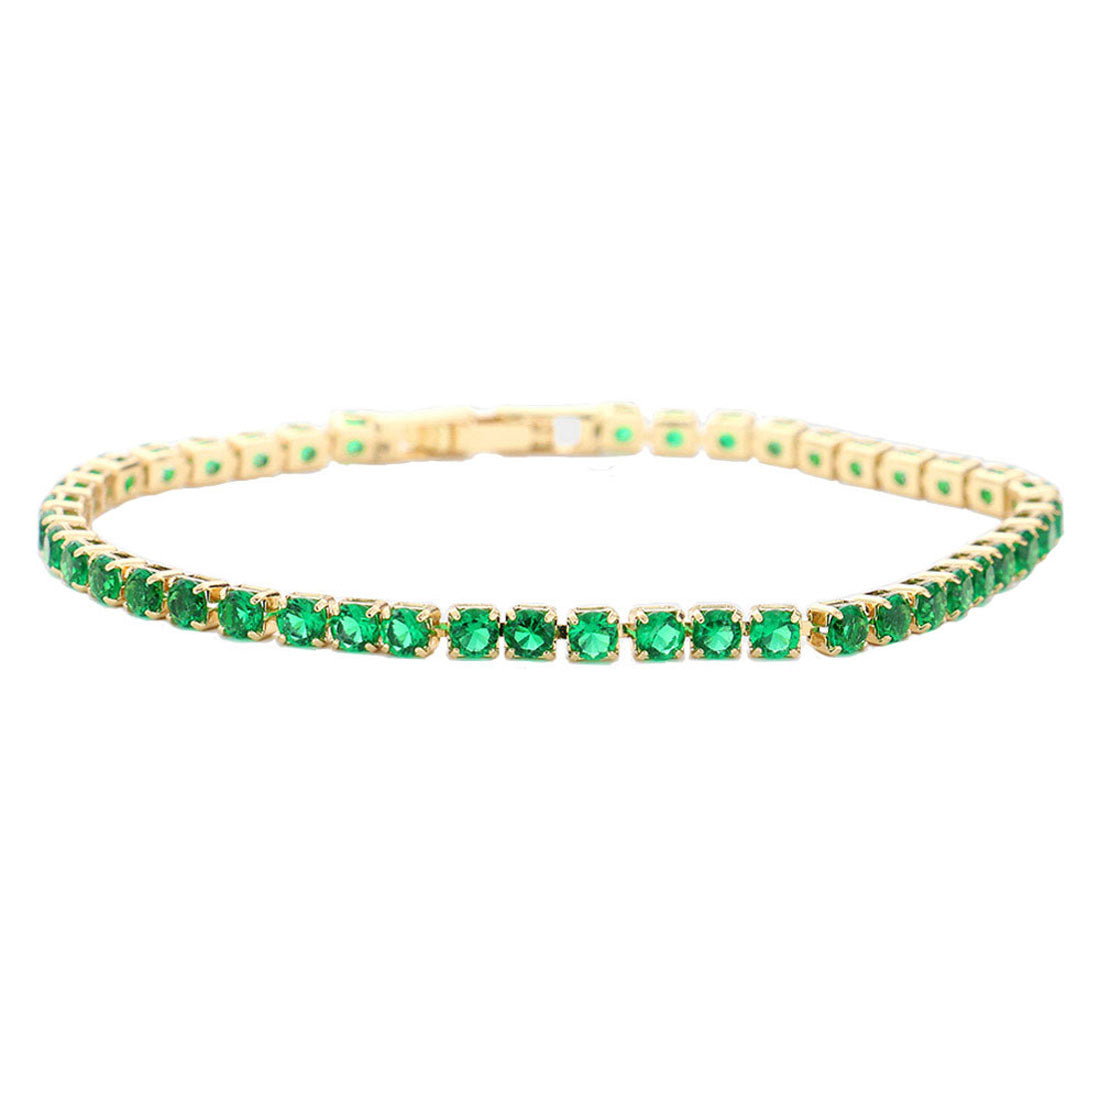 Emerald Brass Metal Tennis Evening Bracelet, Get ready with these Evening Bracelet, put on a pop of color to complete your ensemble. Perfect for adding just the right amount of shimmer & shine and a touch of class to special events. Perfect Birthday Gift, Anniversary Gift, Mother's Day Gift, Graduation Gift.